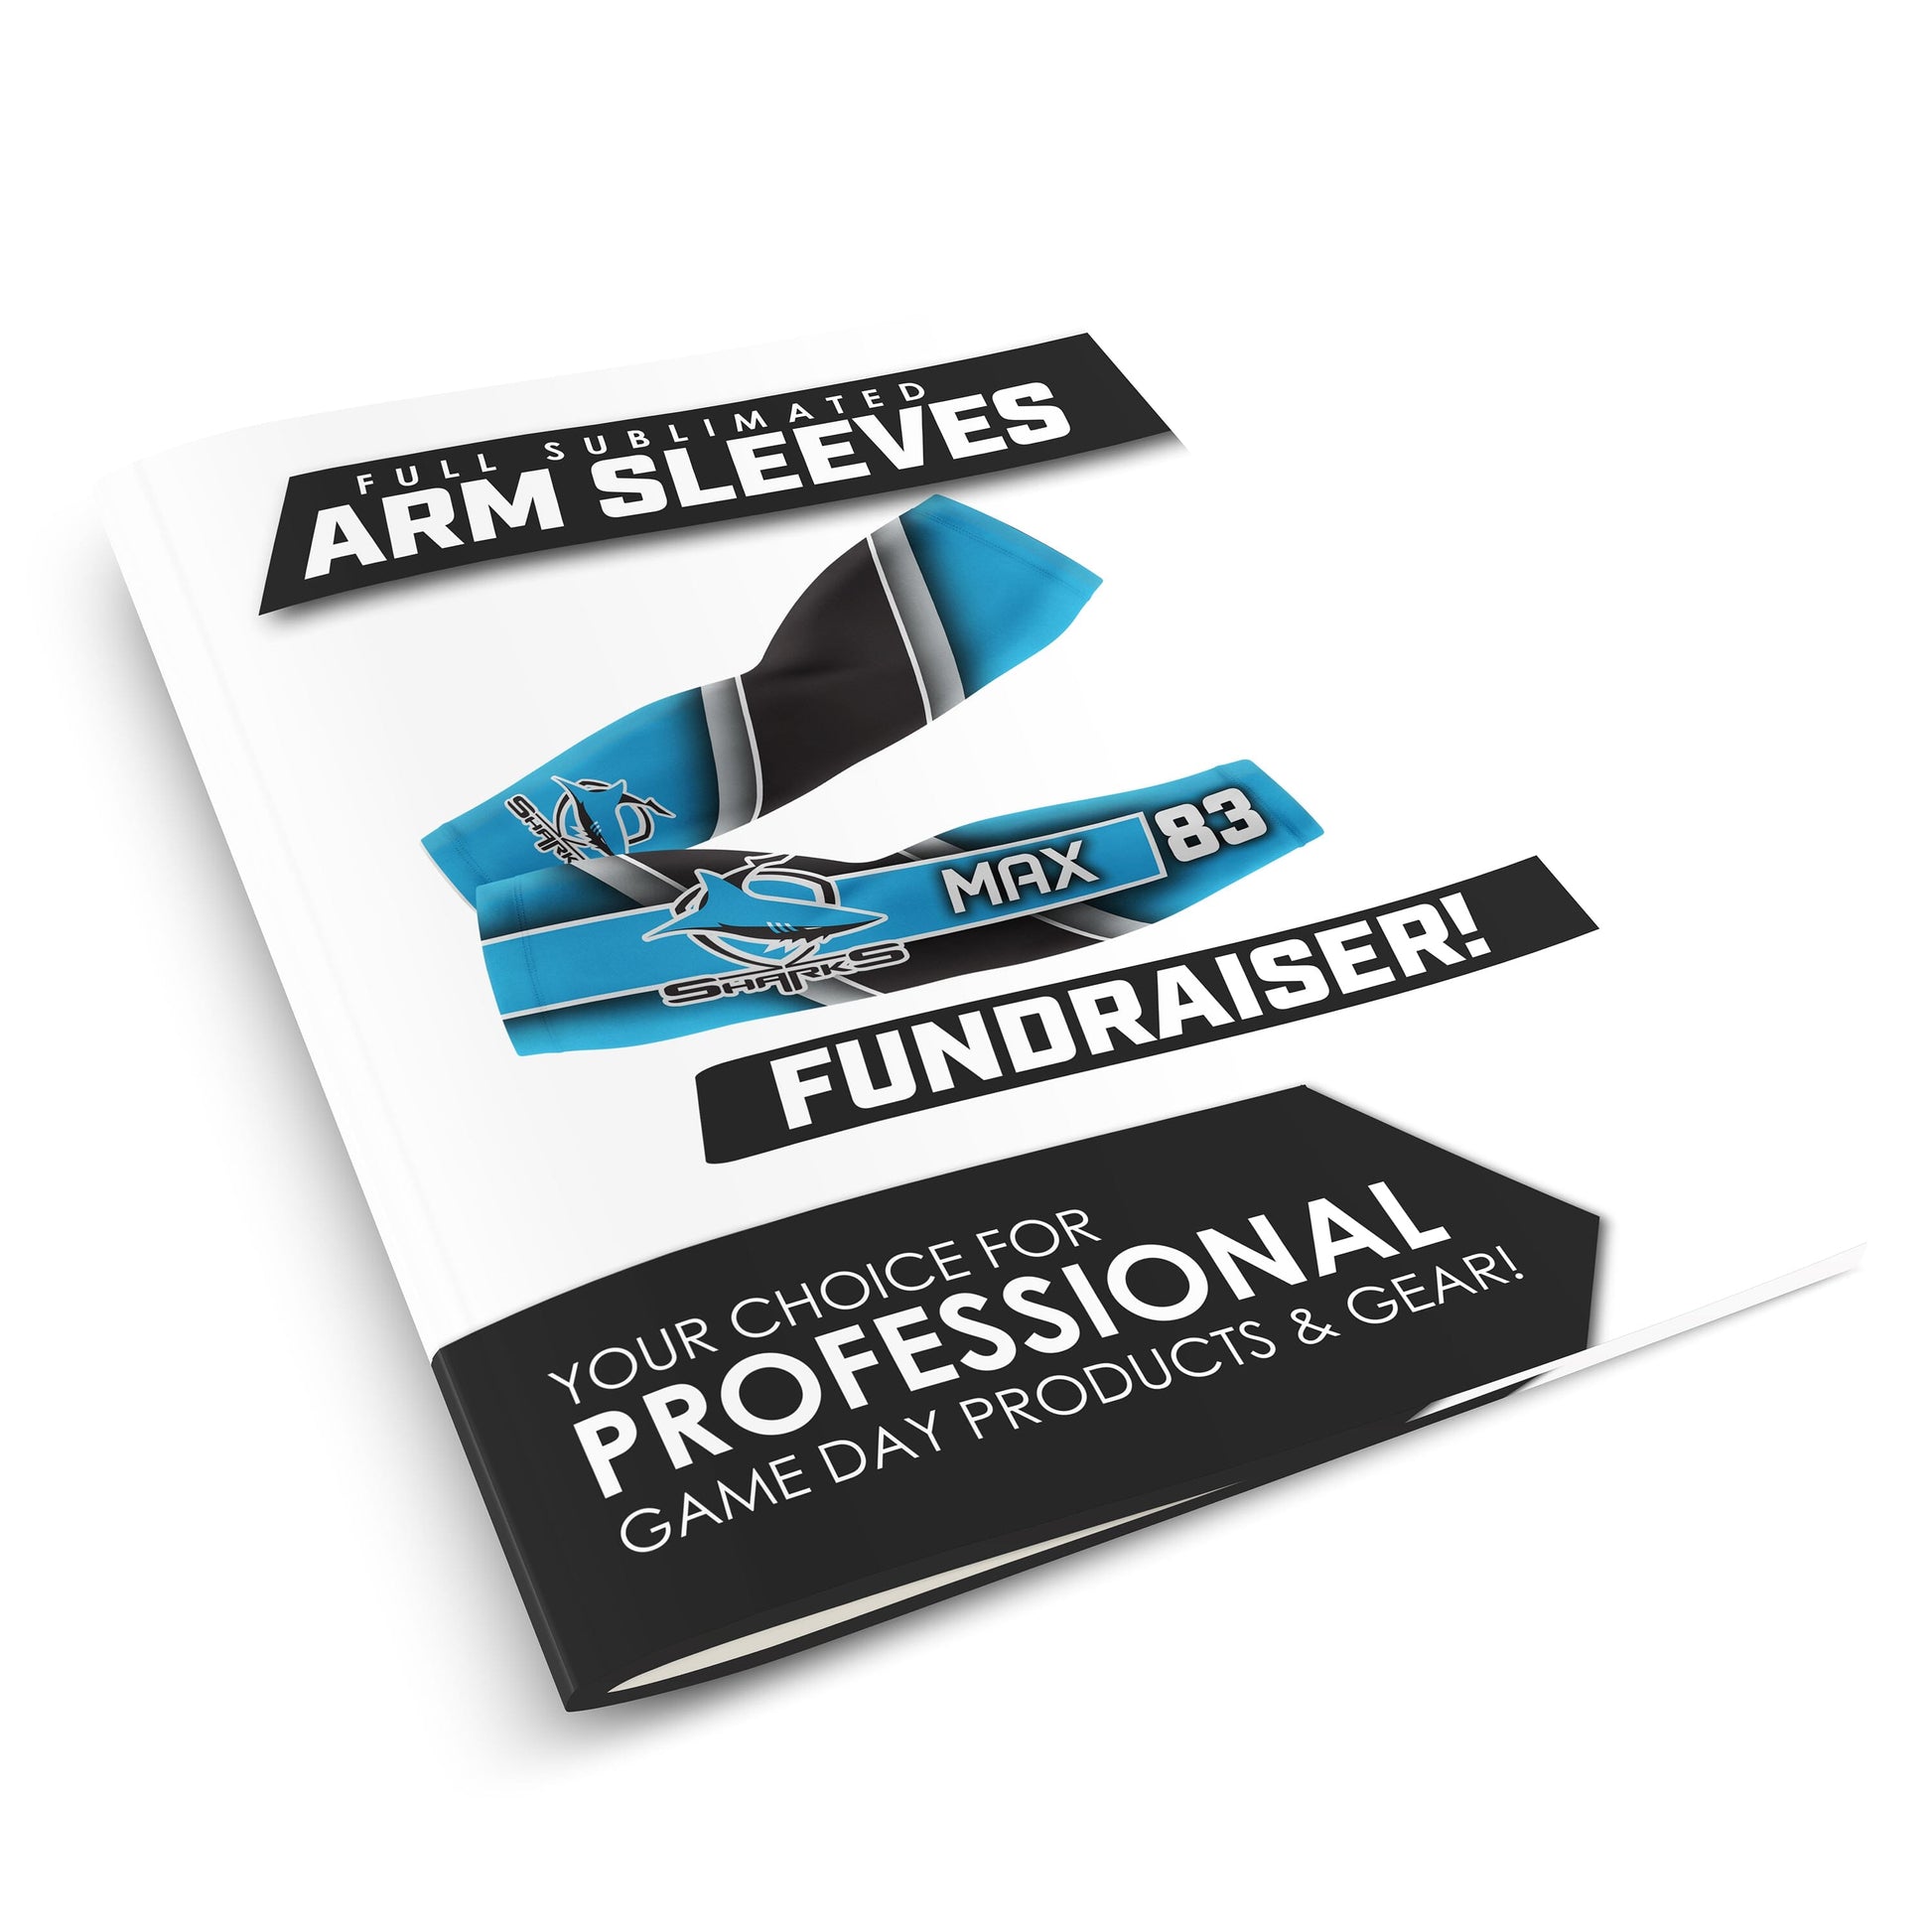 BLITZ Series Arm Sleeve Collection & Marketing Kit LIMITED SPECIAL OFFER-Photoshop Template - PSMGraphix